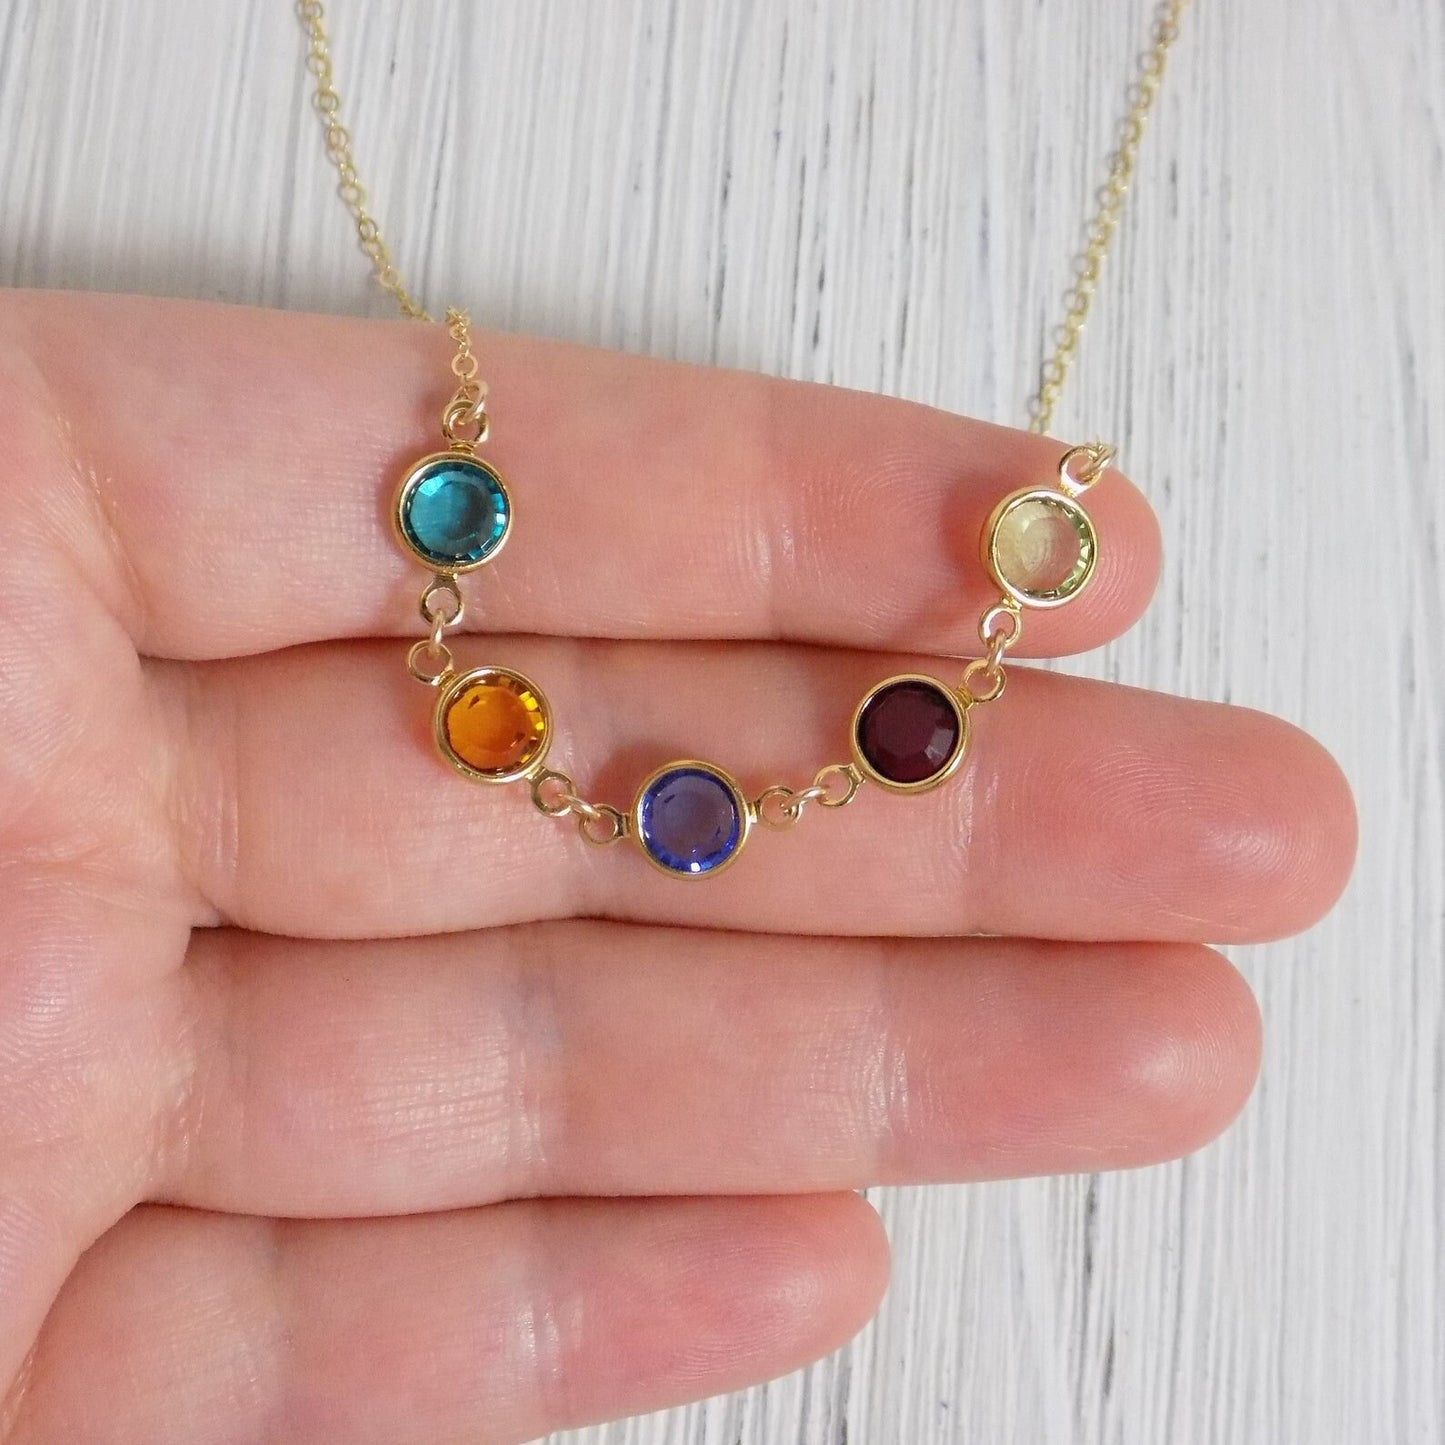 Dainty Birthstone Necklace - Family Birthstone Necklace Gold - Custom Birthday Gift - Mothers Gift - Mothers Day Gift For Mom - B-04